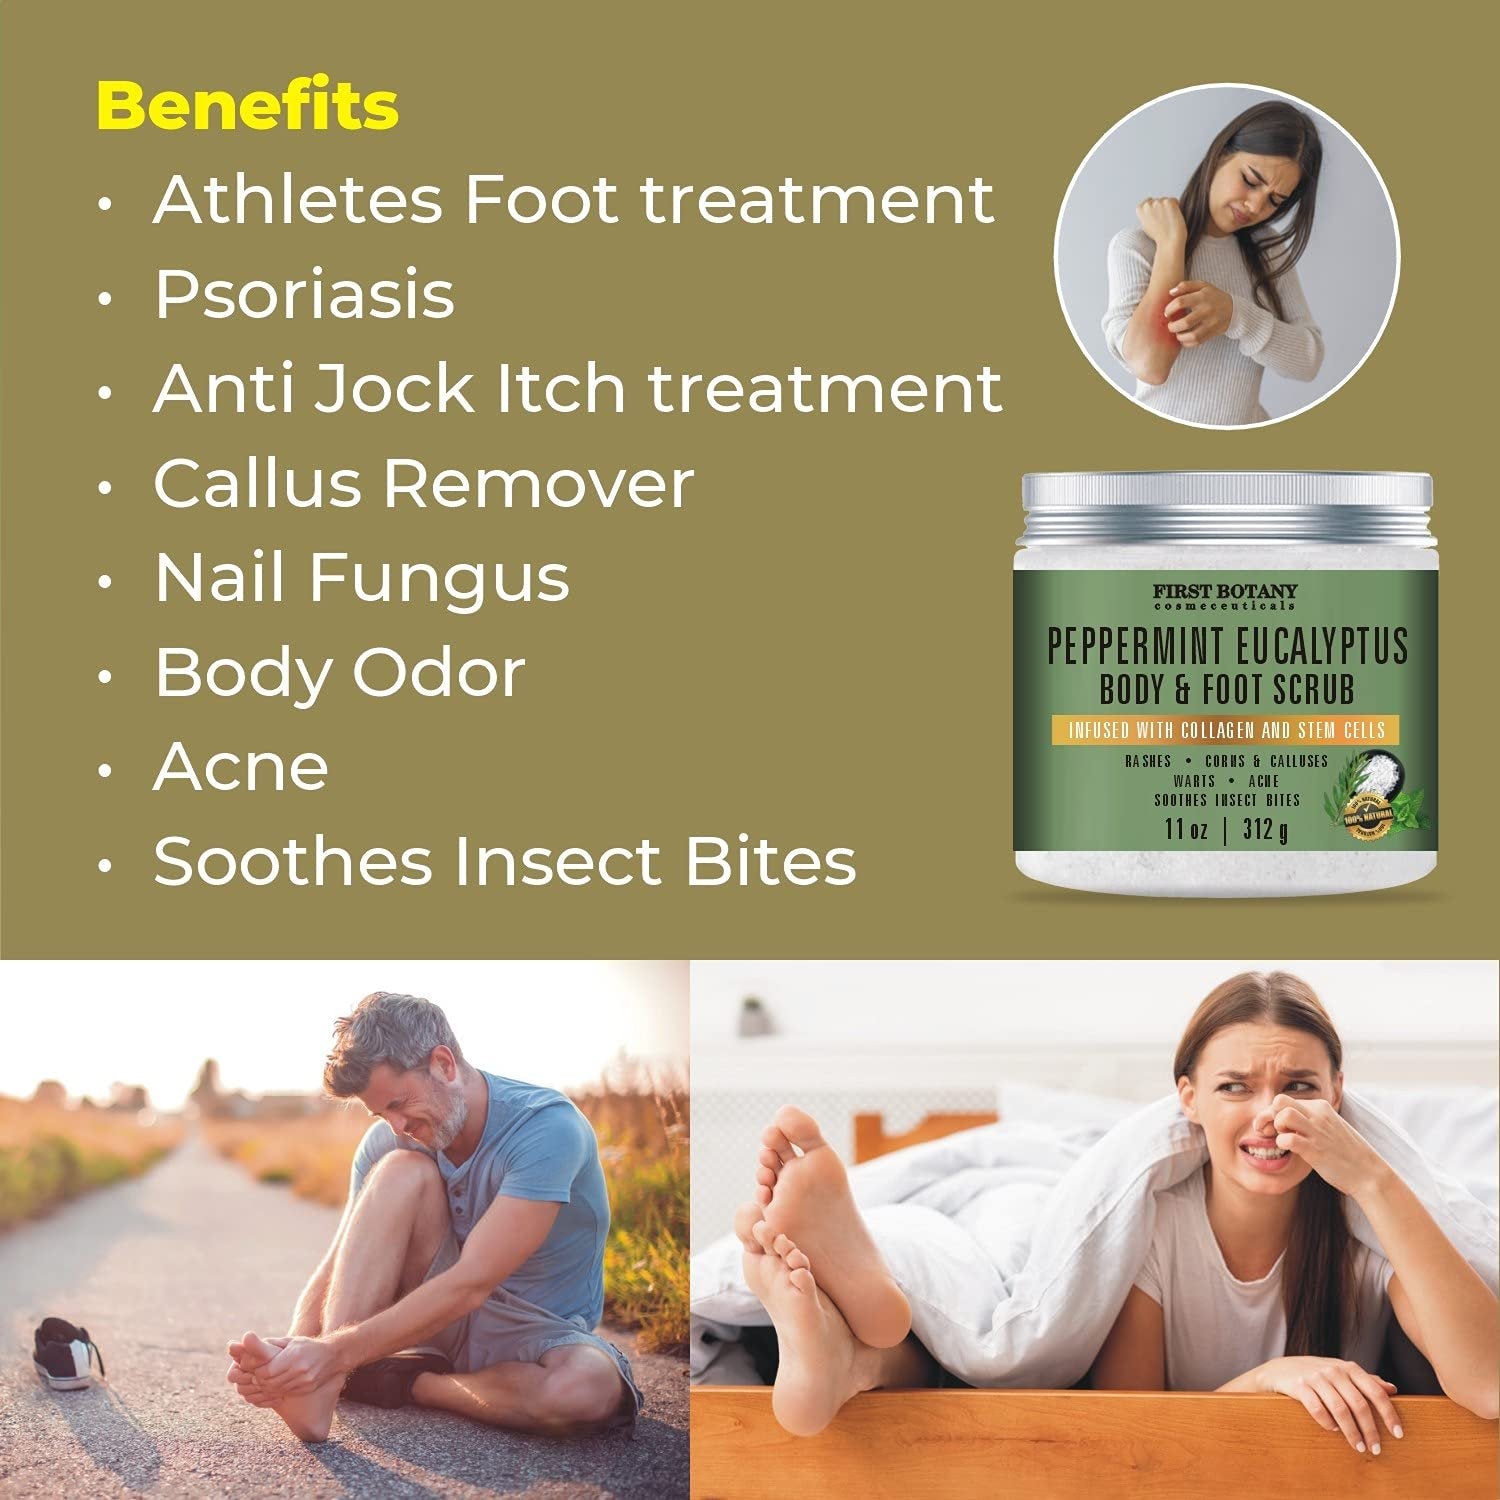 100% Natural Peppermint Eucalyptus Tea Tree Body & Foot Scrub - w/ Collagen & Stem cells, Best for Acne, Dandruff & Warts, Helps with Corns, Calluses, Athlete foot, Jock Itch & Body Odor (11 oz)